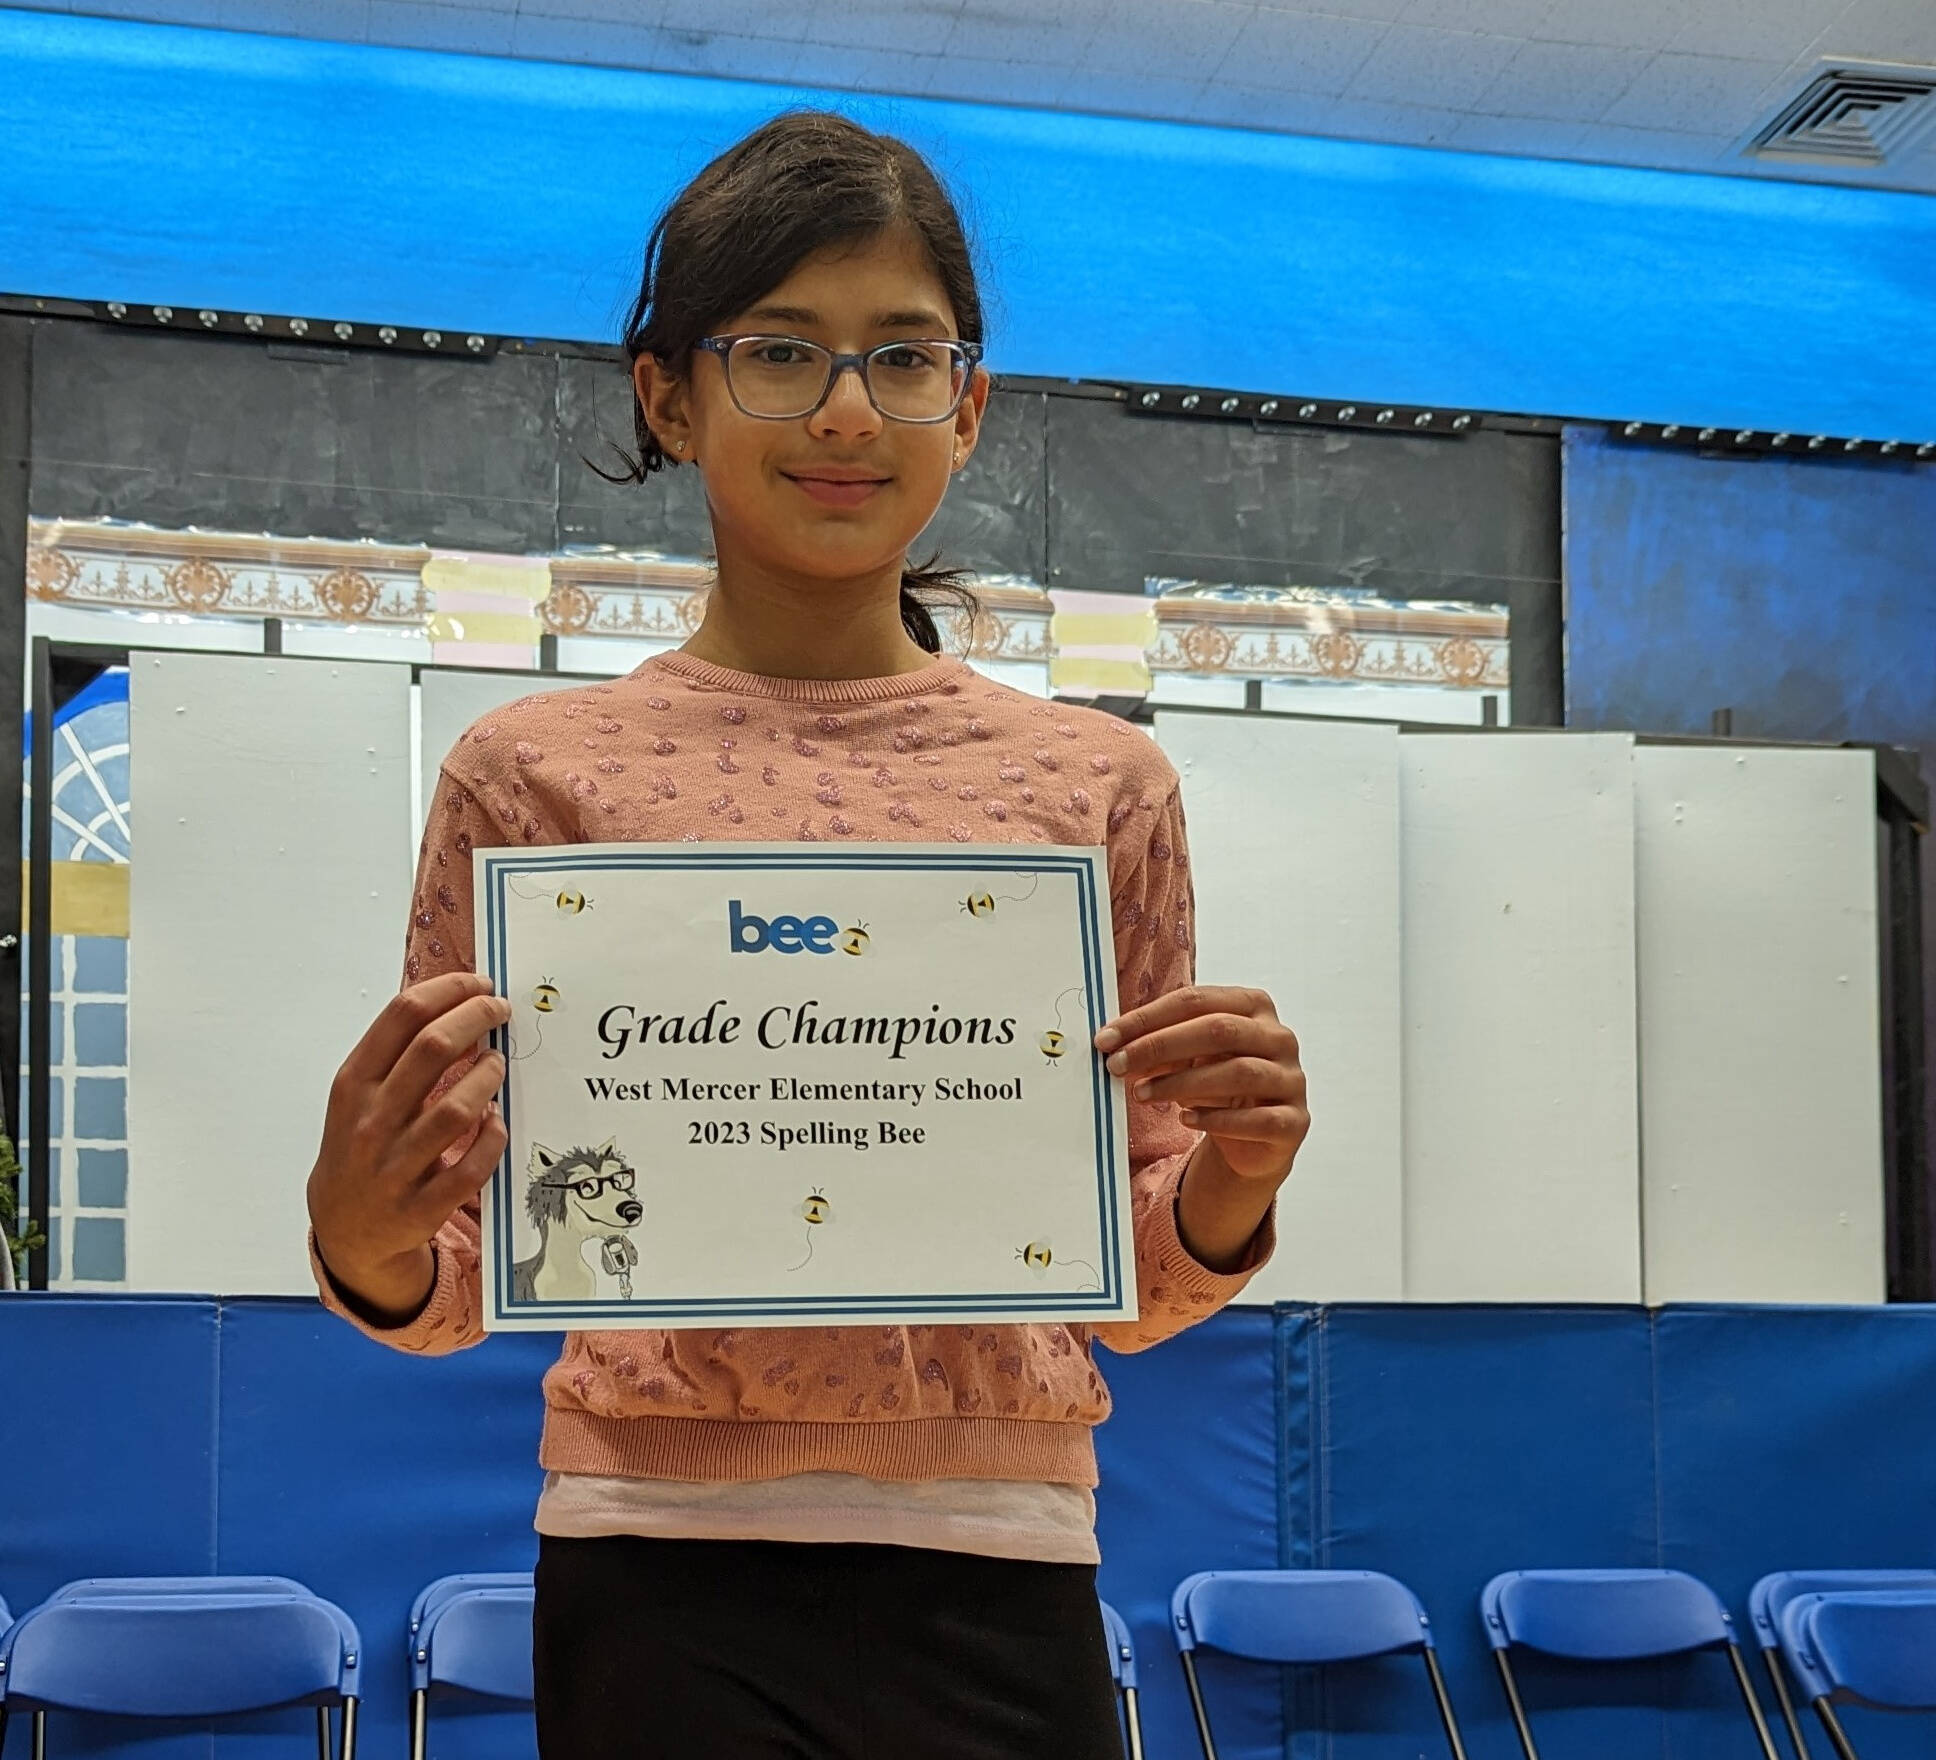 West Mercer Elementary fifth-grader Neeva Mody won the school’s spelling bee with the victorious word “splendid” on Jan. 27 in the school auditorium. She notched a $25 gift card donated by Island Books, and advances to compete in the regional spelling bee on March 26 in Seattle. Runner-up was third-grader Evan Marshall. The bee, which was organized by parent Justin Deng, featured 30 children and had winners for each grade. The other grade winners are: kindergartners Artharv Choubey and Roshan Wishwas; first-grader Morgan Marshall; second-grader Jeet Mody; and fourth-grader Timo Kiriputt. Courtesy photo